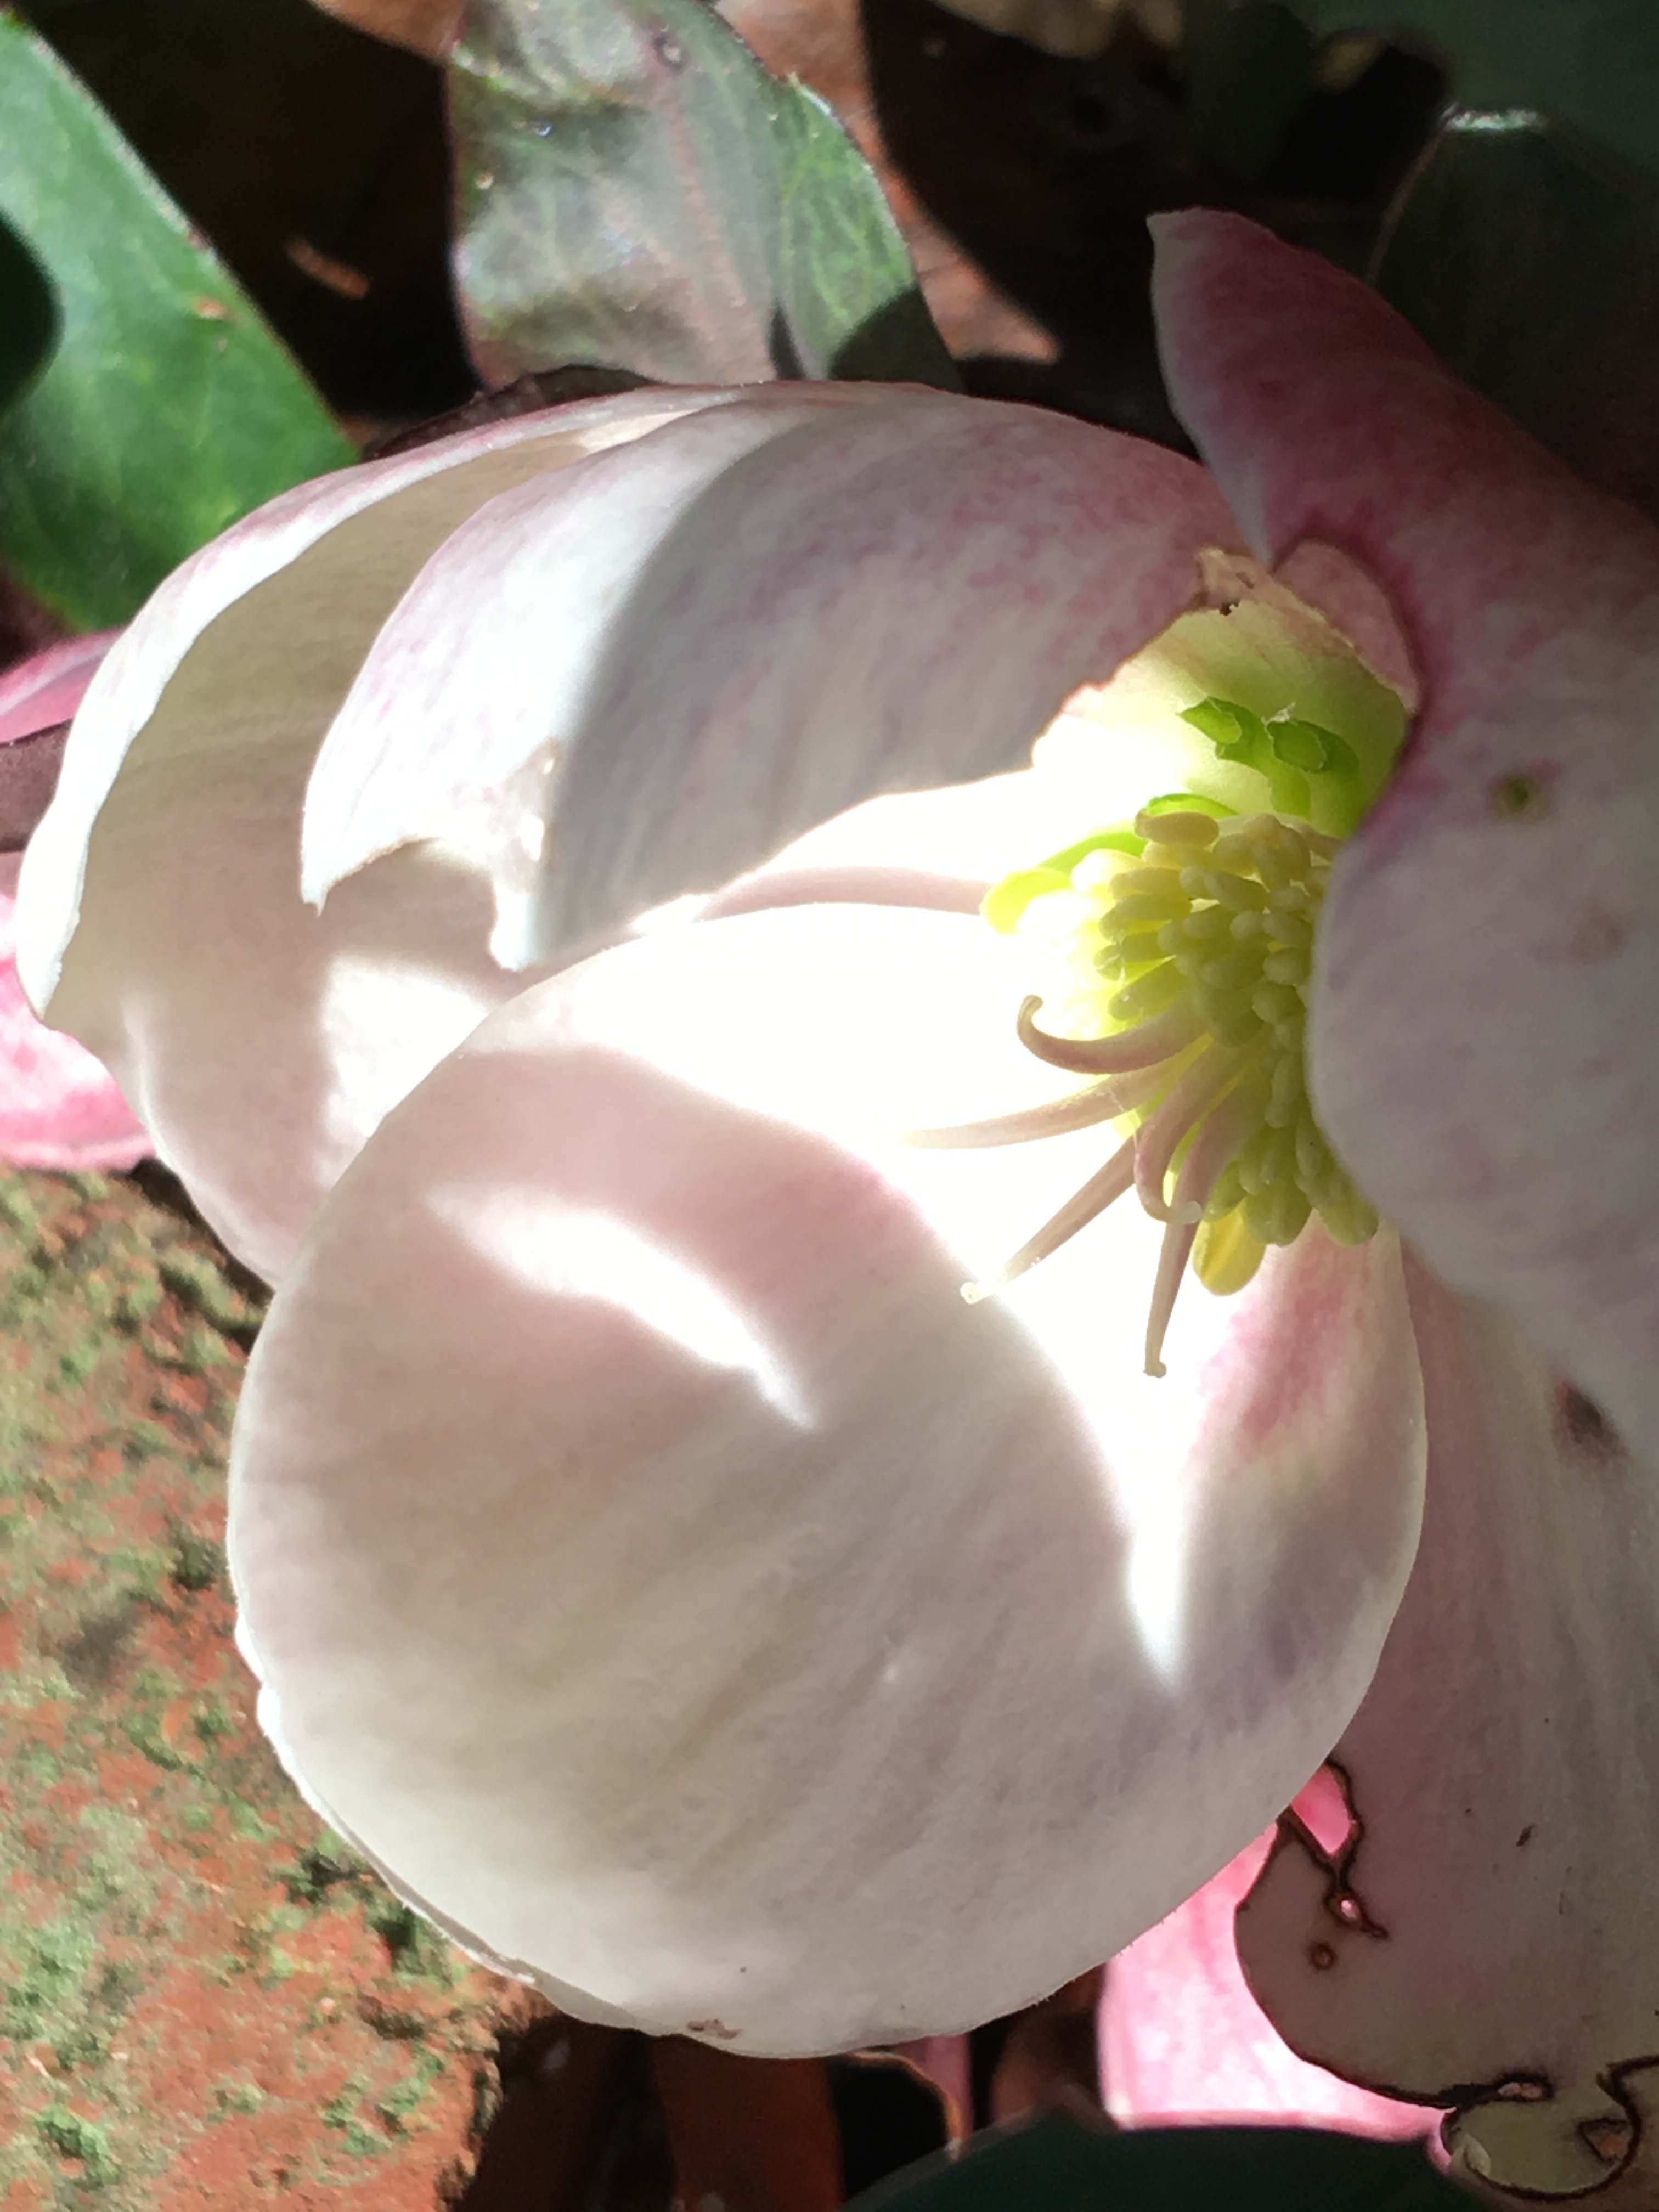 The flower of the hellebore.